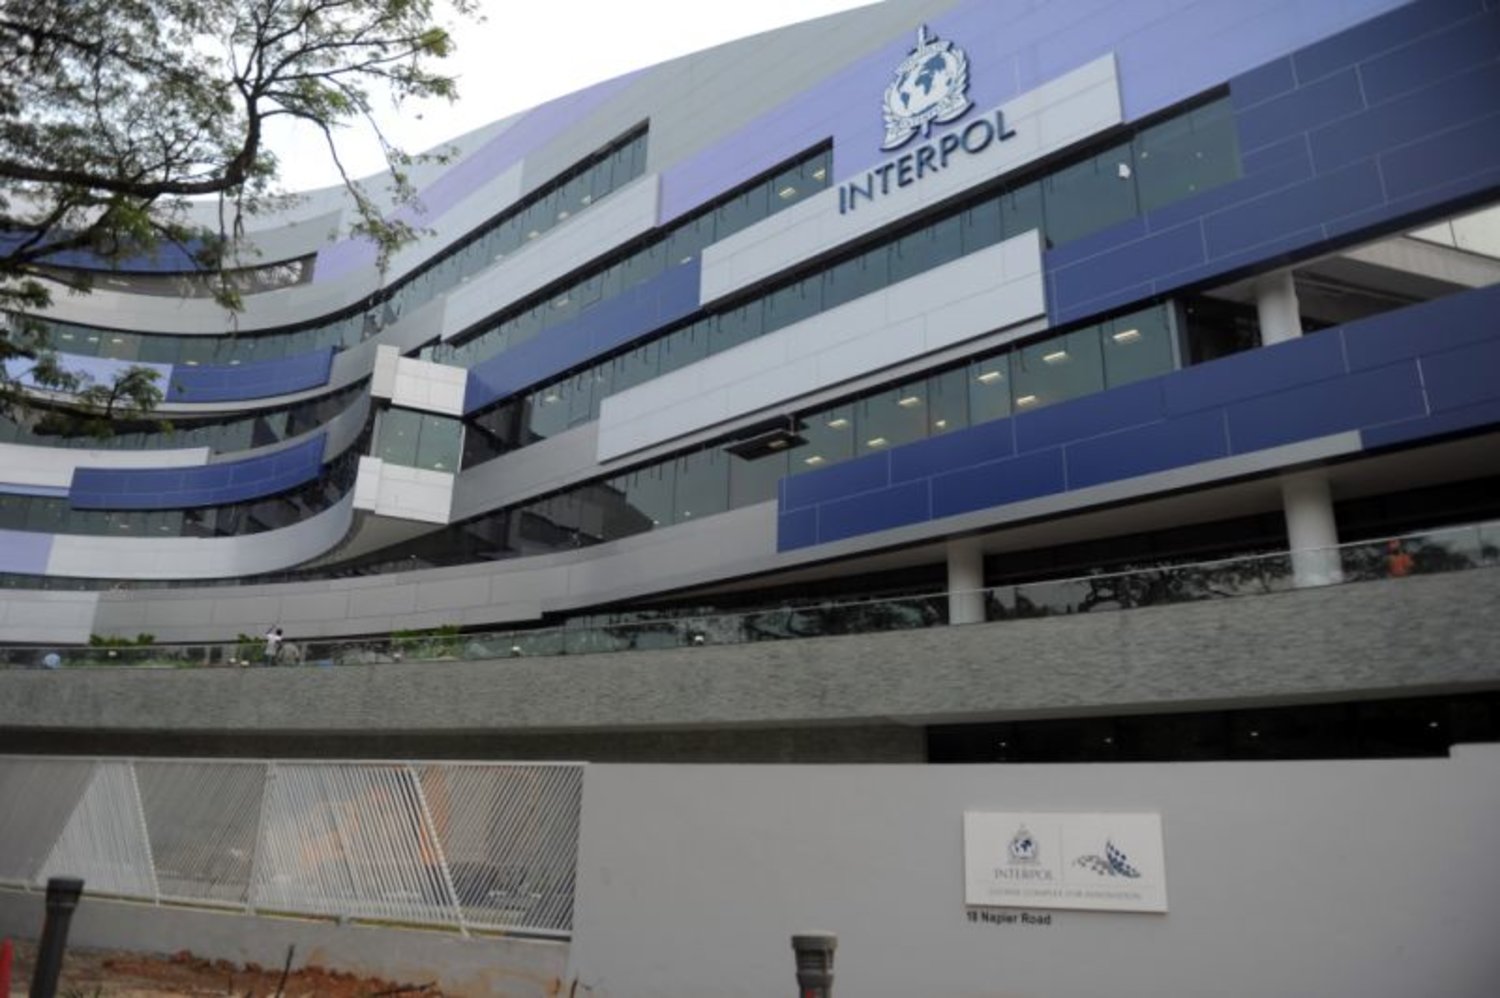 INTERPOL Global Complex for Innovation (IGCI), pictured in Singapore, on September 30, 2014 (AFP Photo/Mohd Fyrol) 